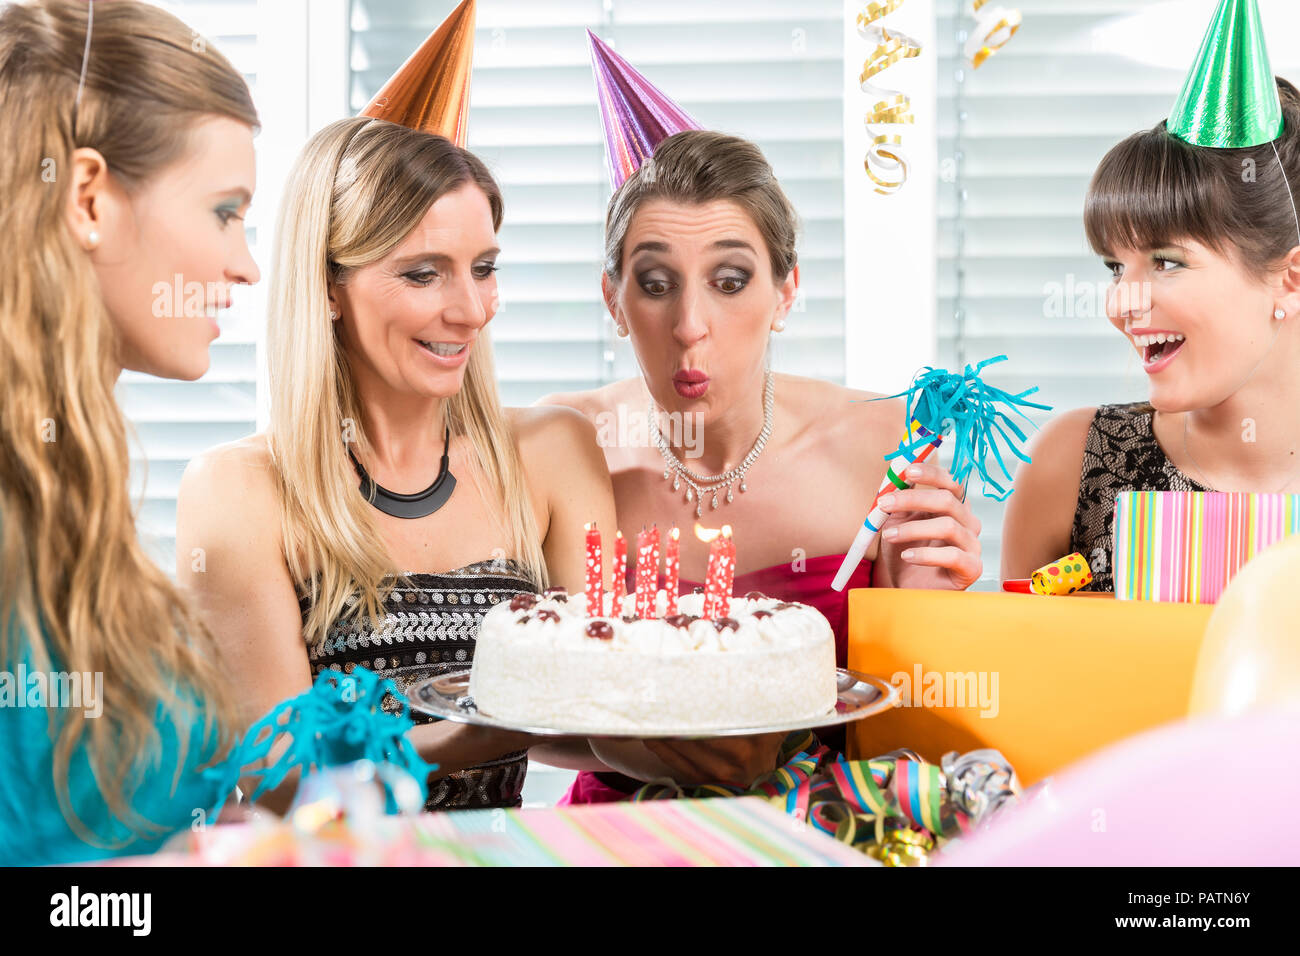 Woman blowing out candles on her birthday cake while celebrating Stock Photo